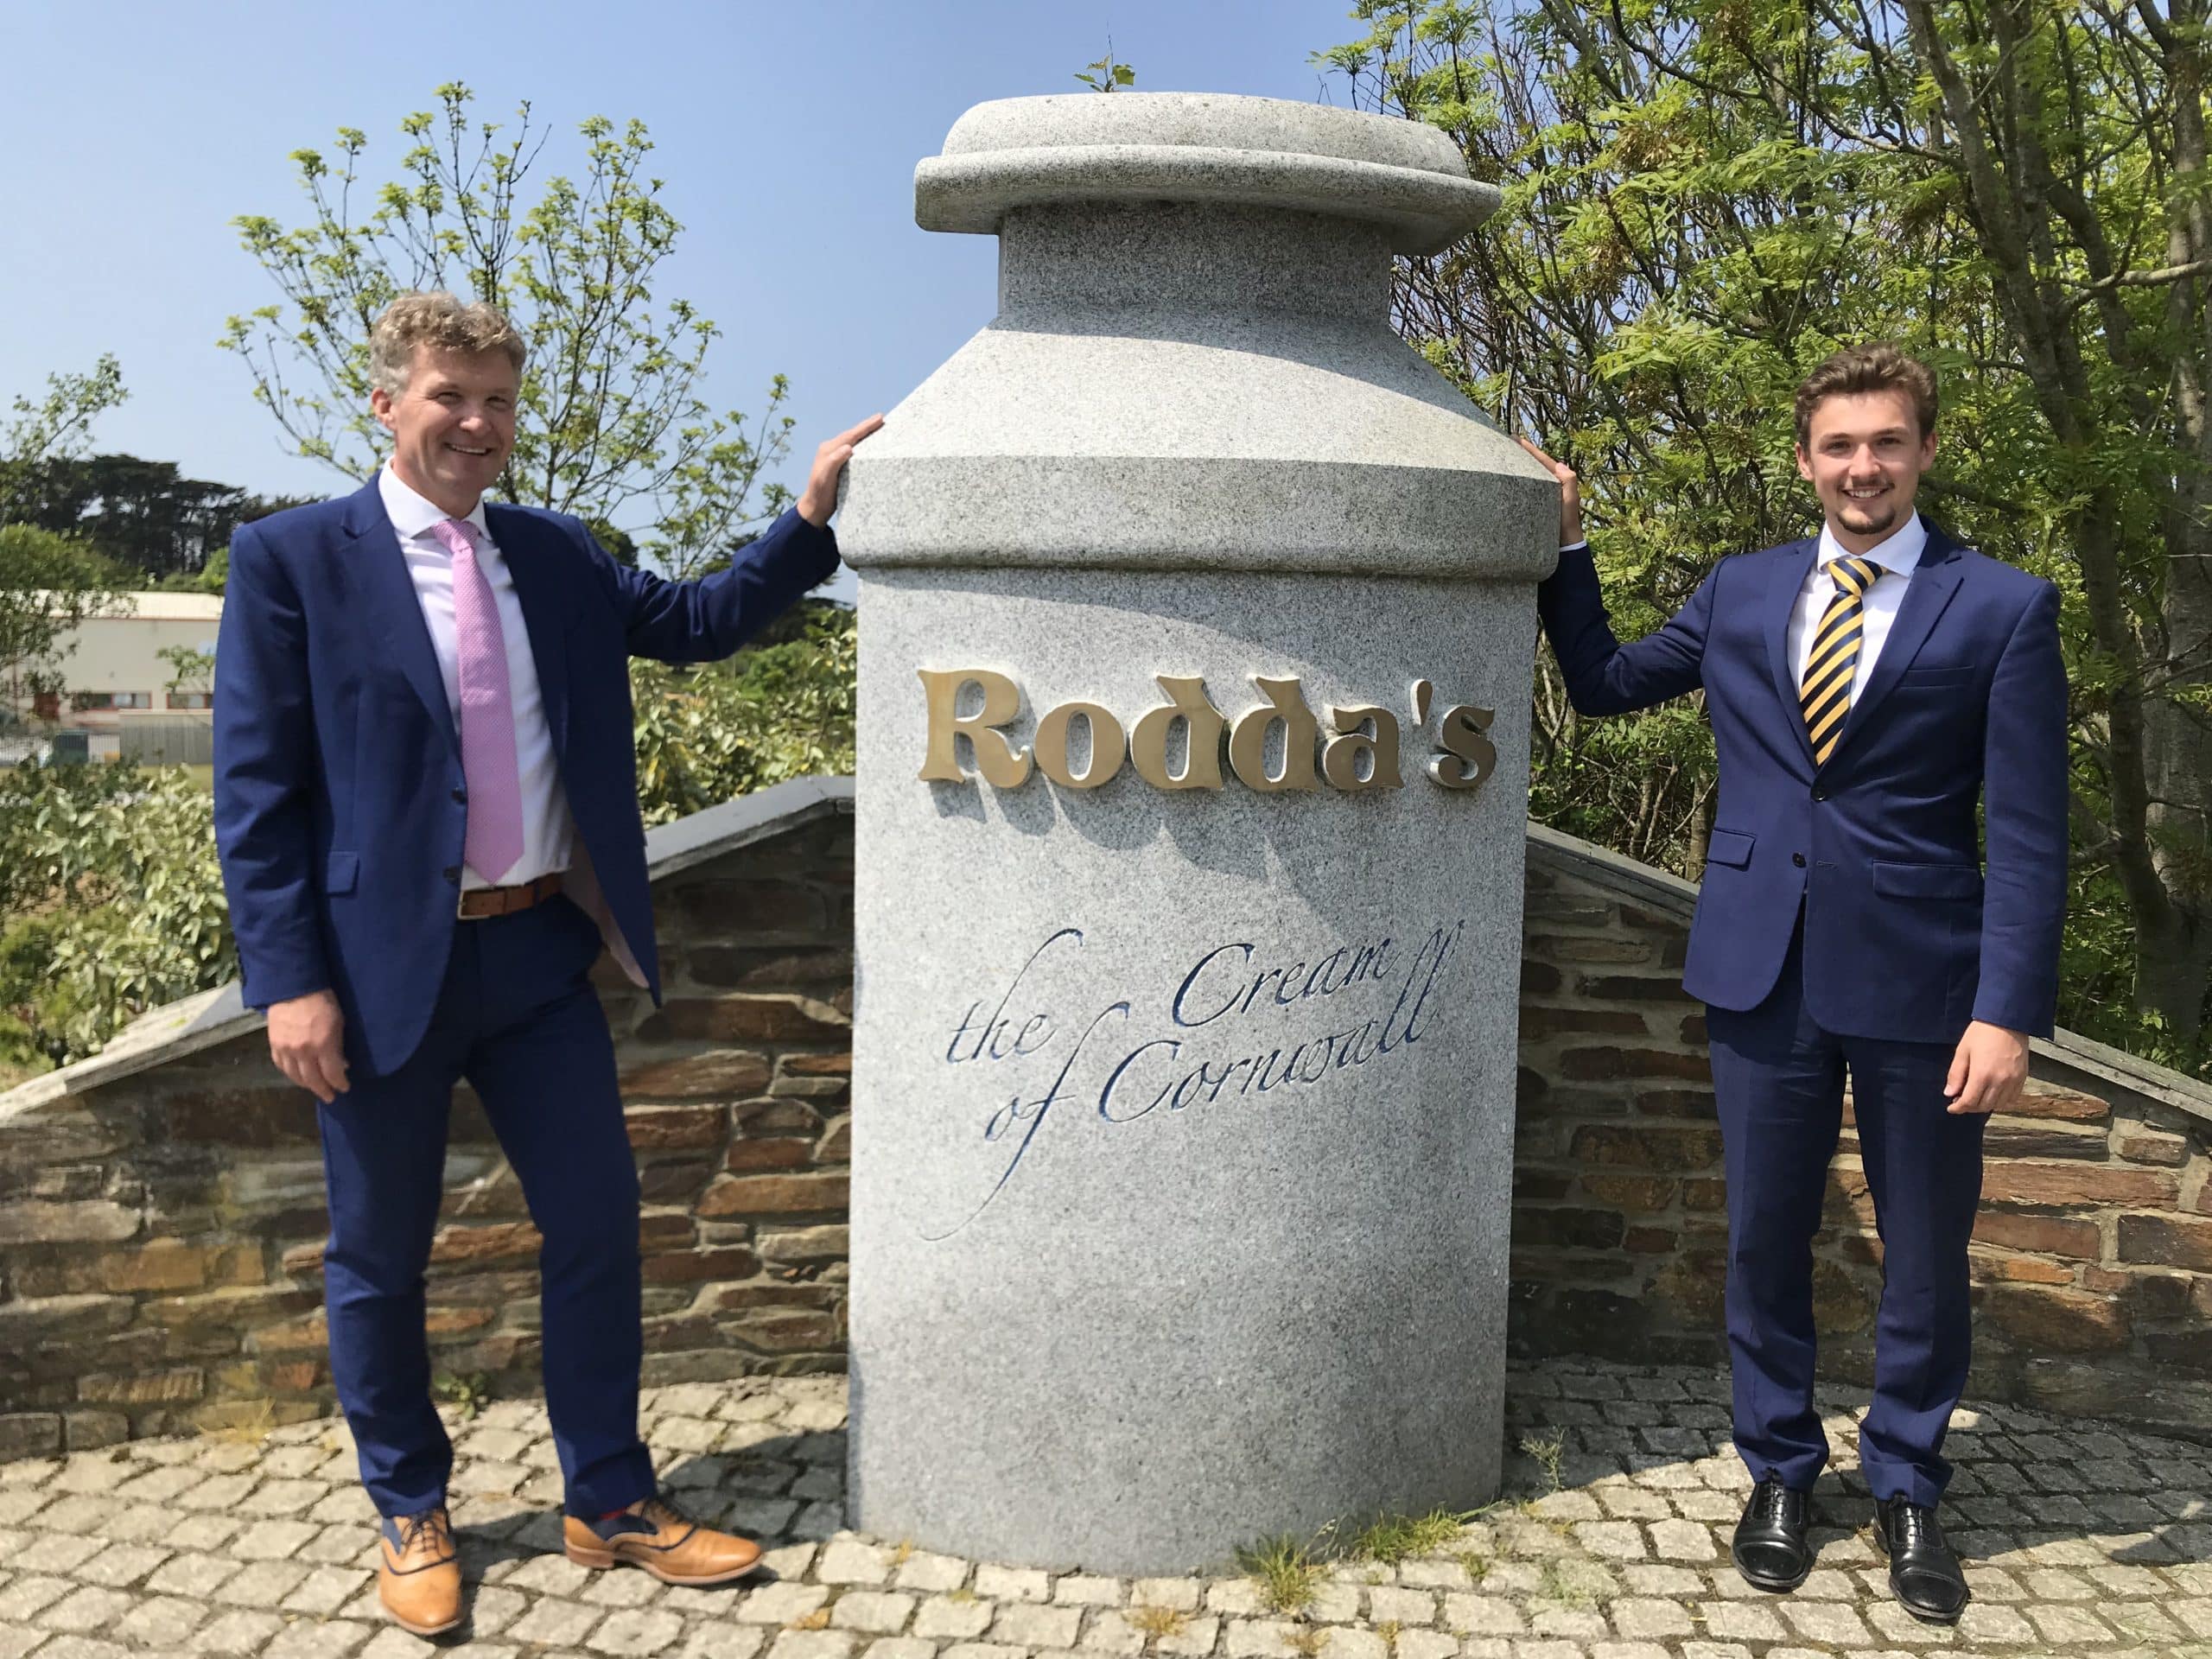 Nick and Alex Rodda stood either side of a giant concrete milk can that has the company logo with "the Cream of Cornwall" engraved underneath.